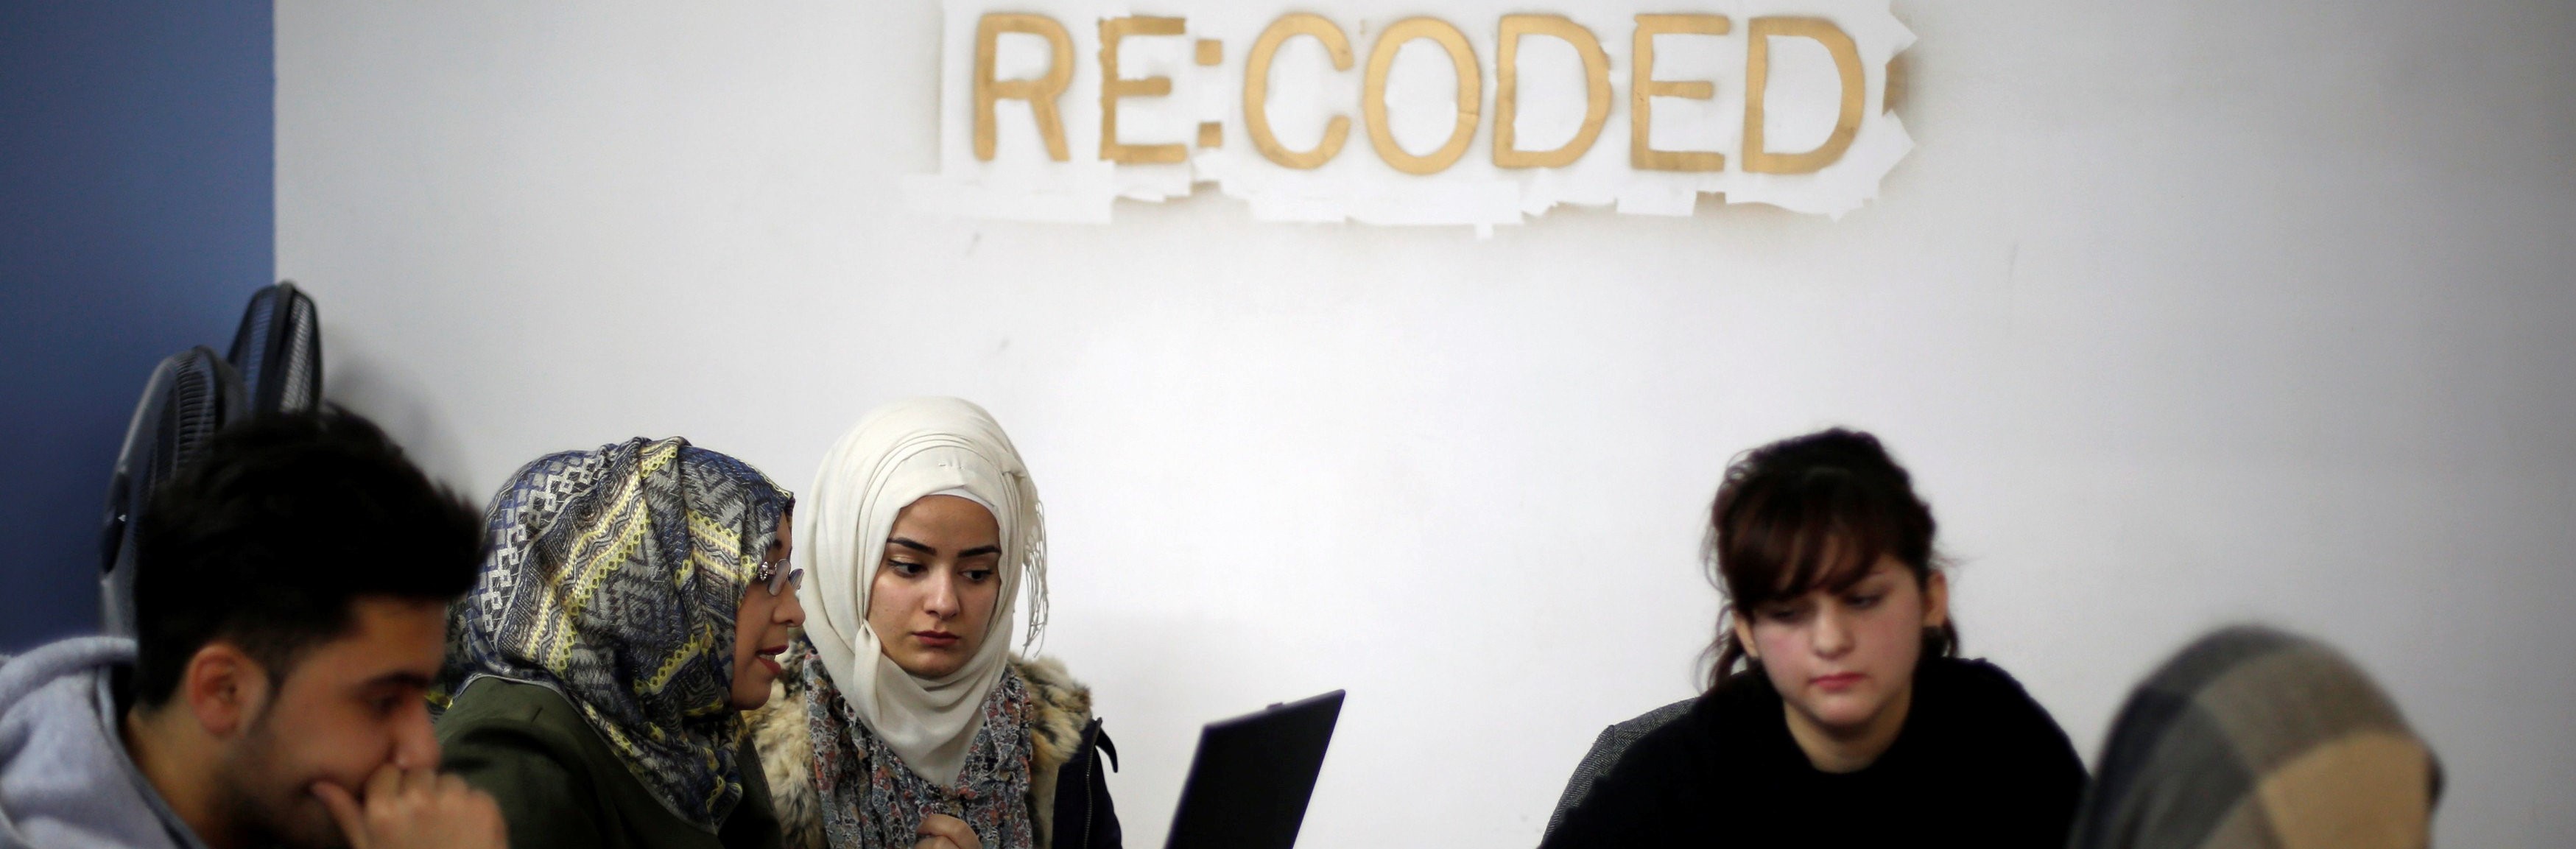 Having fled fighting, Iraqis and Syrians learn to code